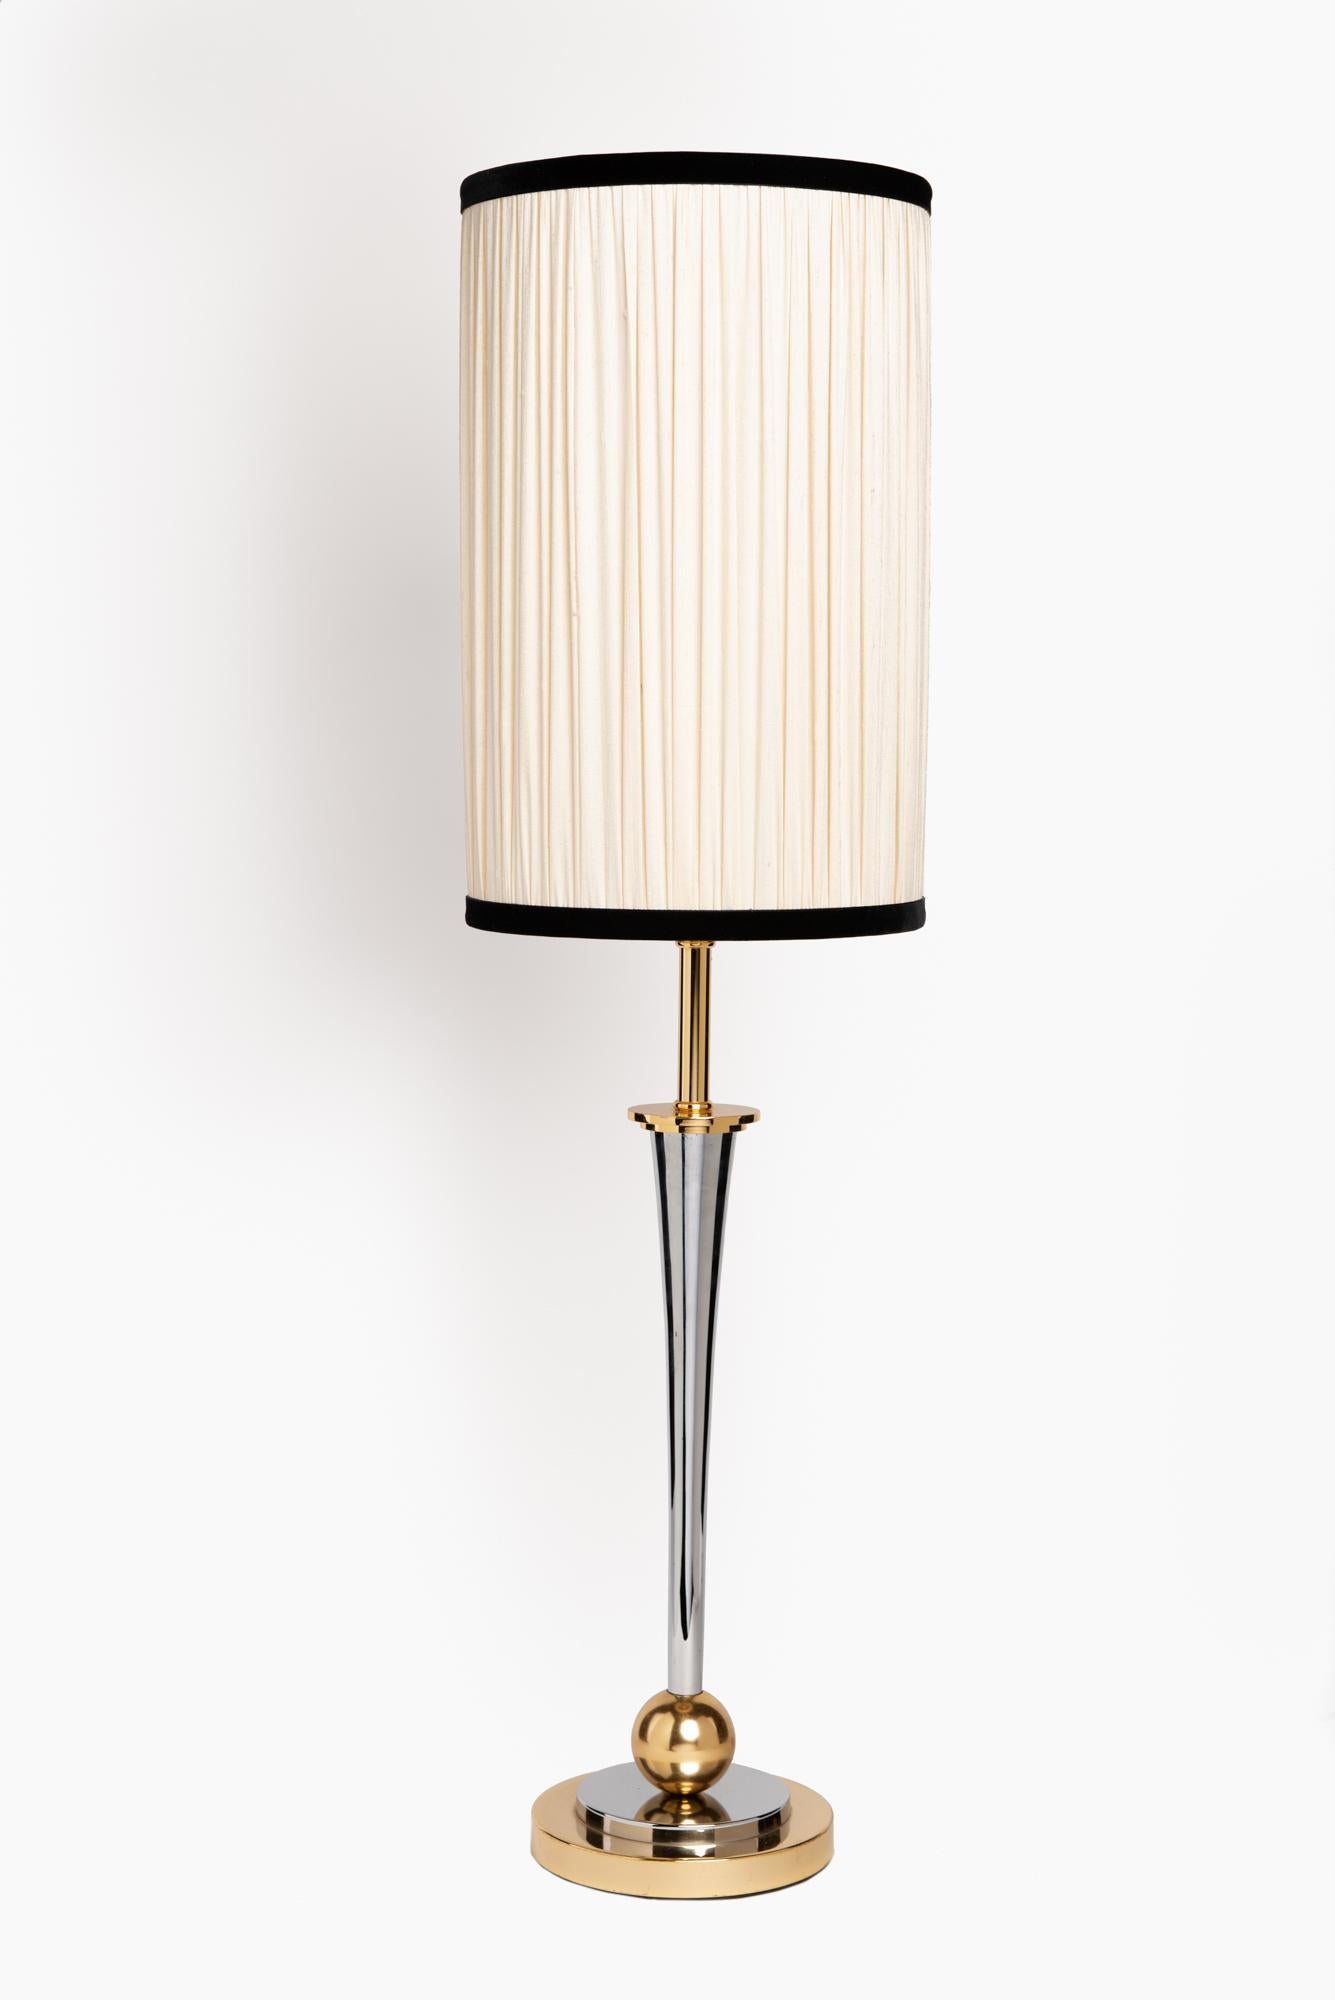 We kindly suggest you read the whole description, because with it we try to give you detailed technical and historical information to guarantee the authenticity of our objects.
Elegant and linear lamp in nickel and gilded brass; it was produced